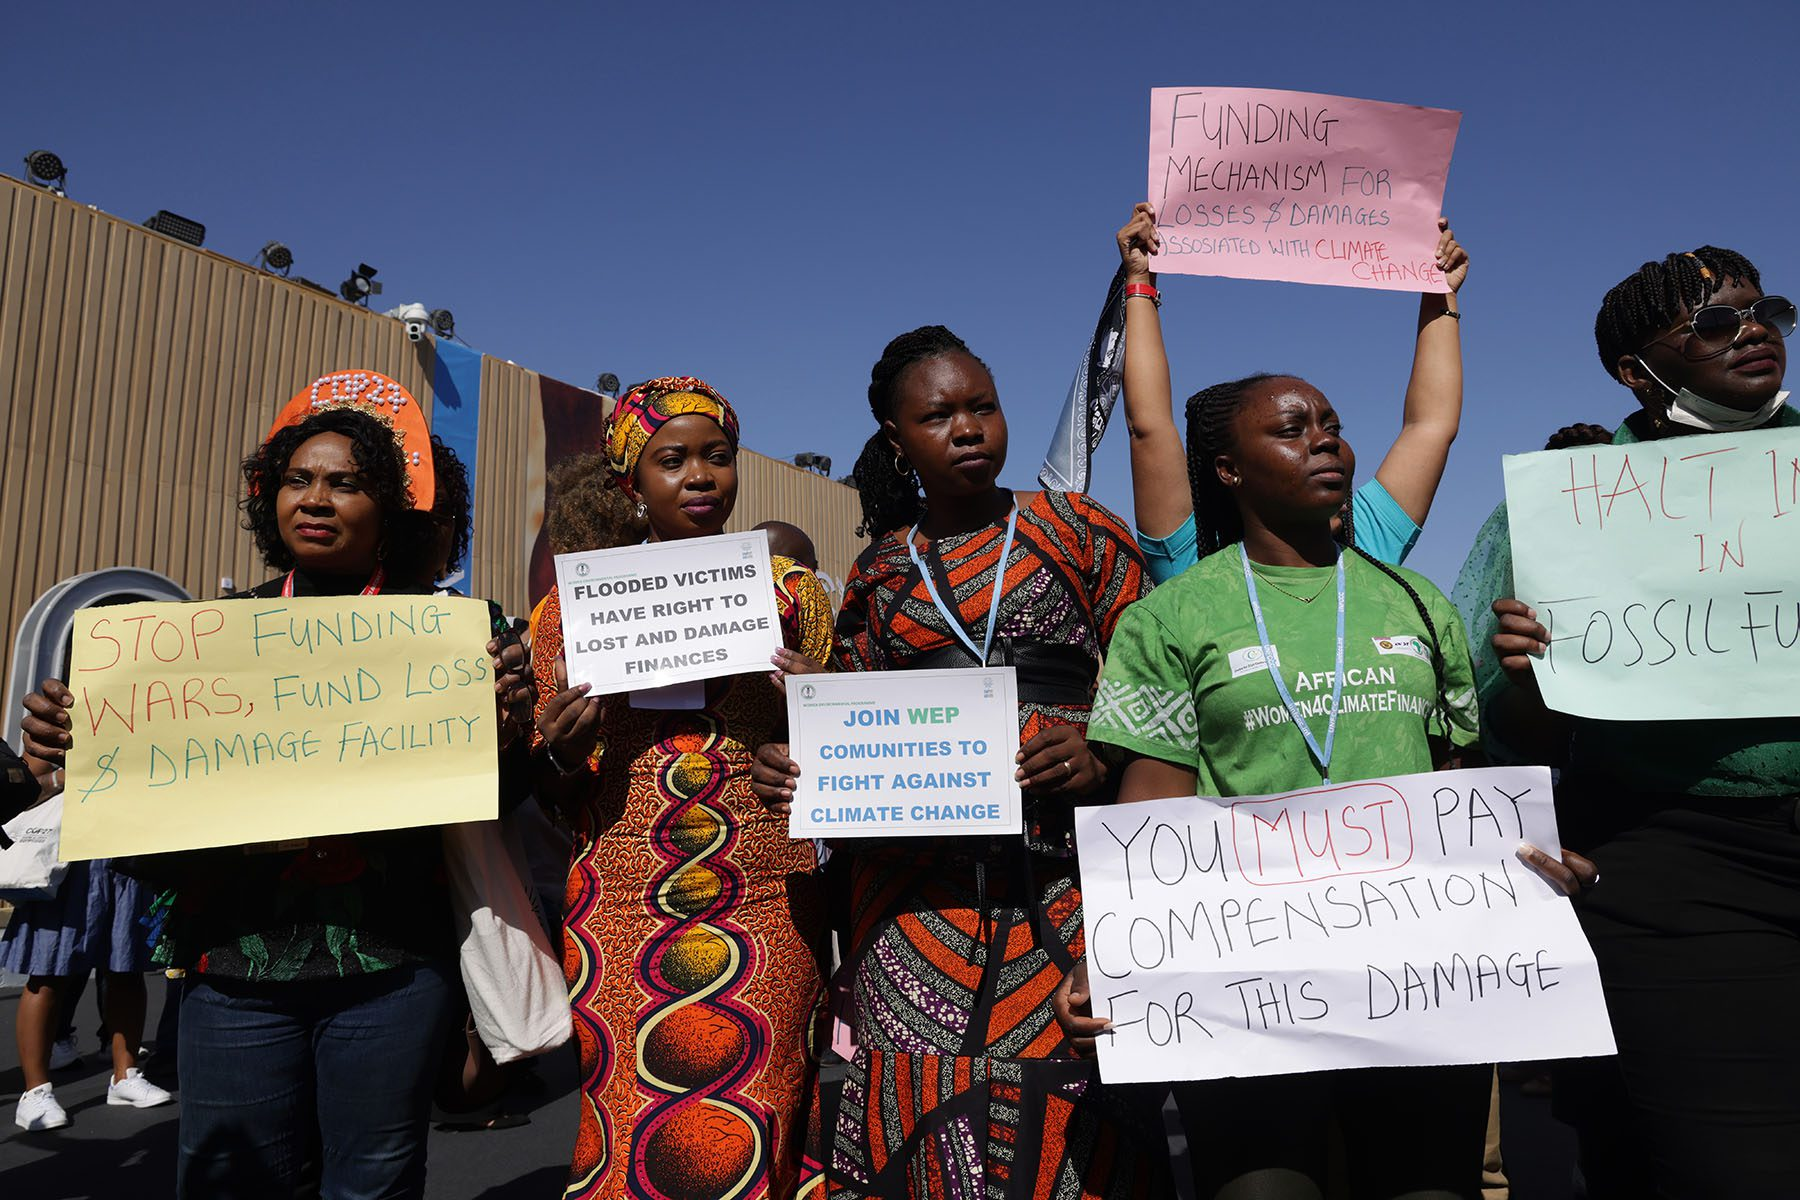 African activists demand compensation payments from countries that have been the greatest contributors to the climate crisis to countries that are disproportionately suffering from it, at the COP27 climate conference in Sharm El Sheikh, Egypt. Photo: Sean Gallup / Getty Images